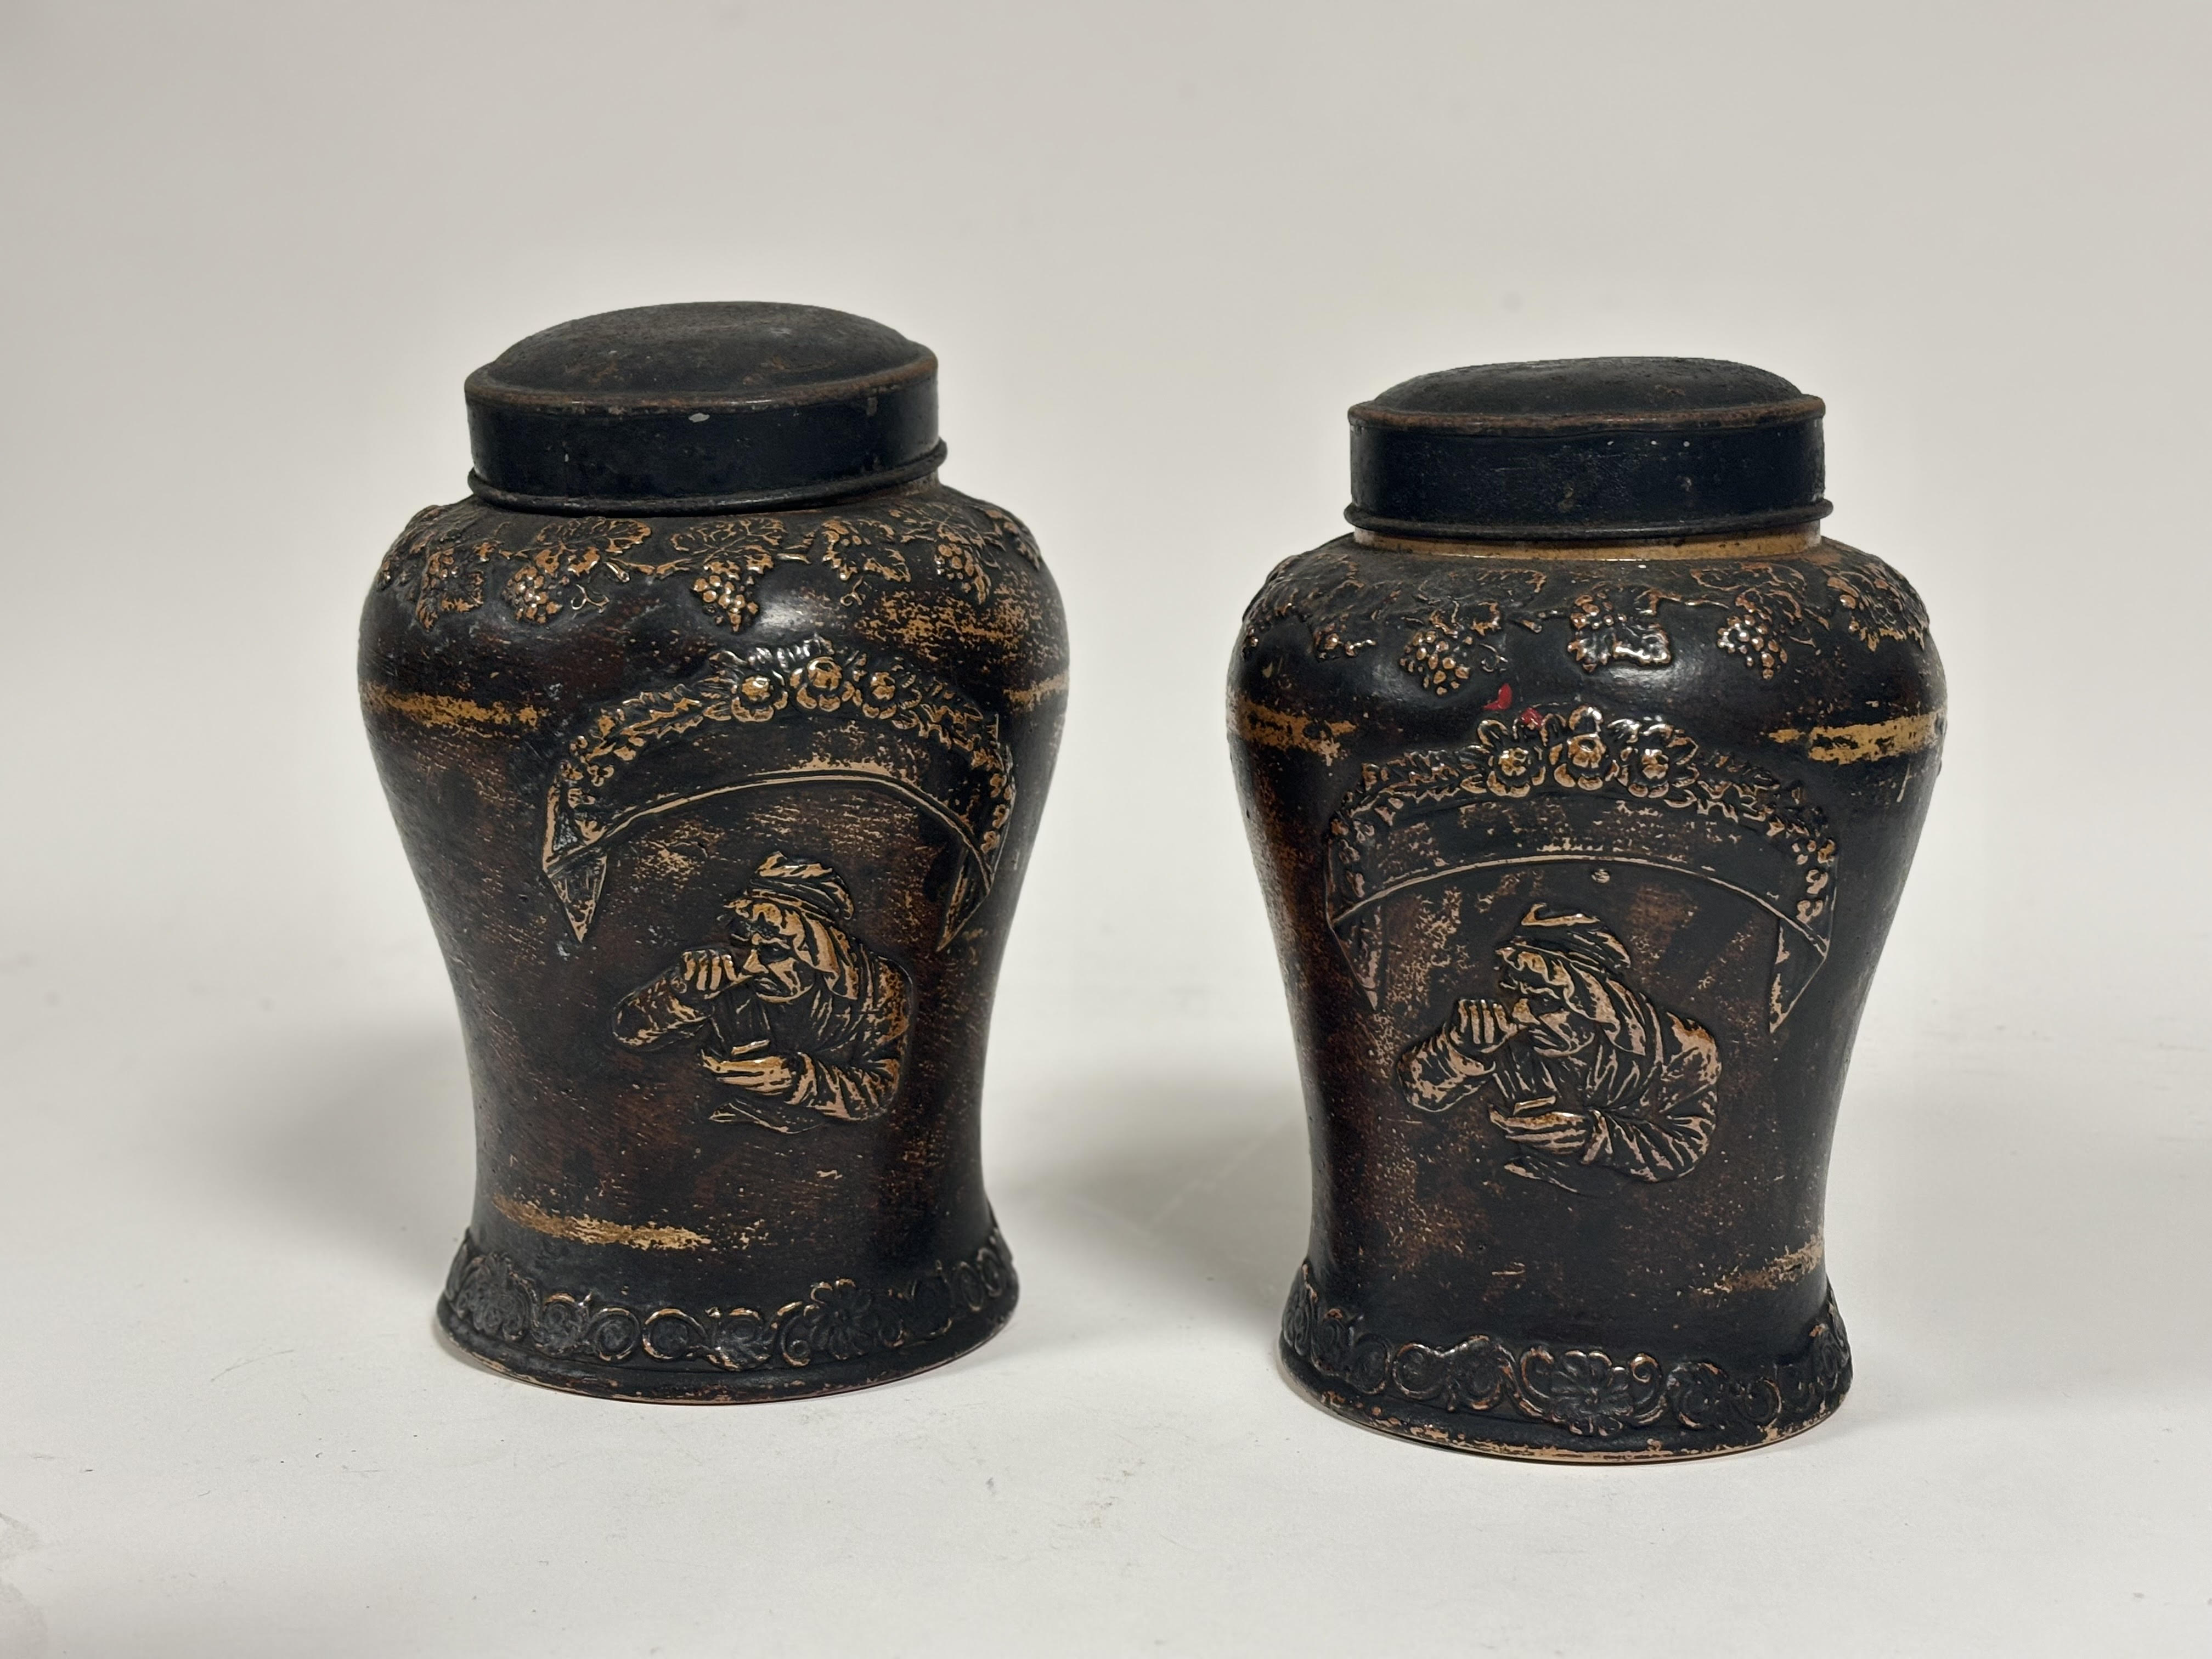 A near pair of Stoneware tobacco jars and towal/metal covers with Art Nouveau style grape vine